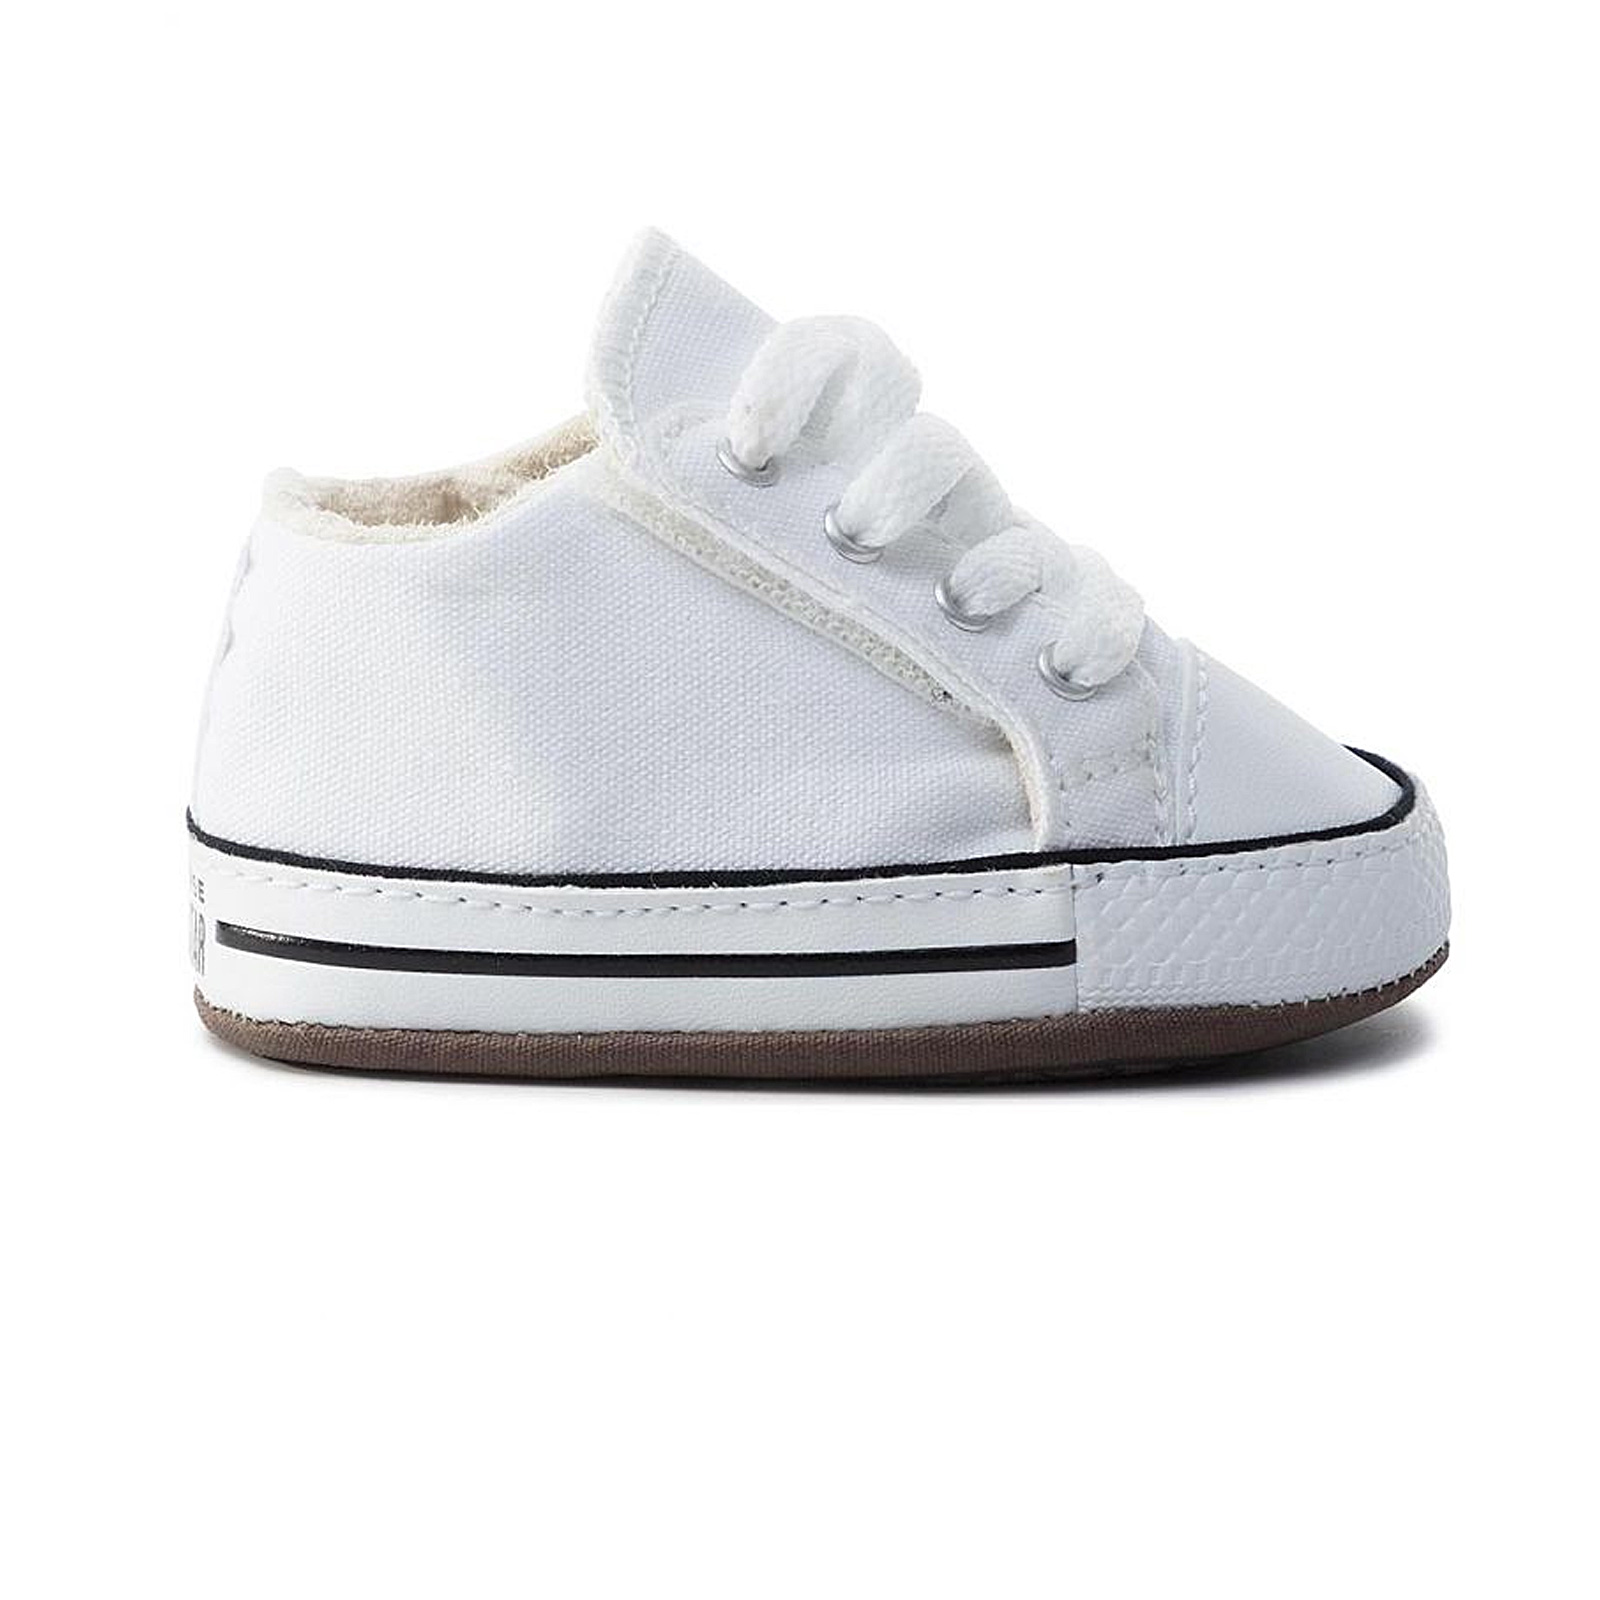 Converse - CHUCK TAYLOR ALL STAR CRIBSTER CANVAS COLOR - 102-WHITE/ NATURAL IVORY/WHITE Παιδικά > Παπούτσια > Sneaker > Παπούτσι Mid Cut